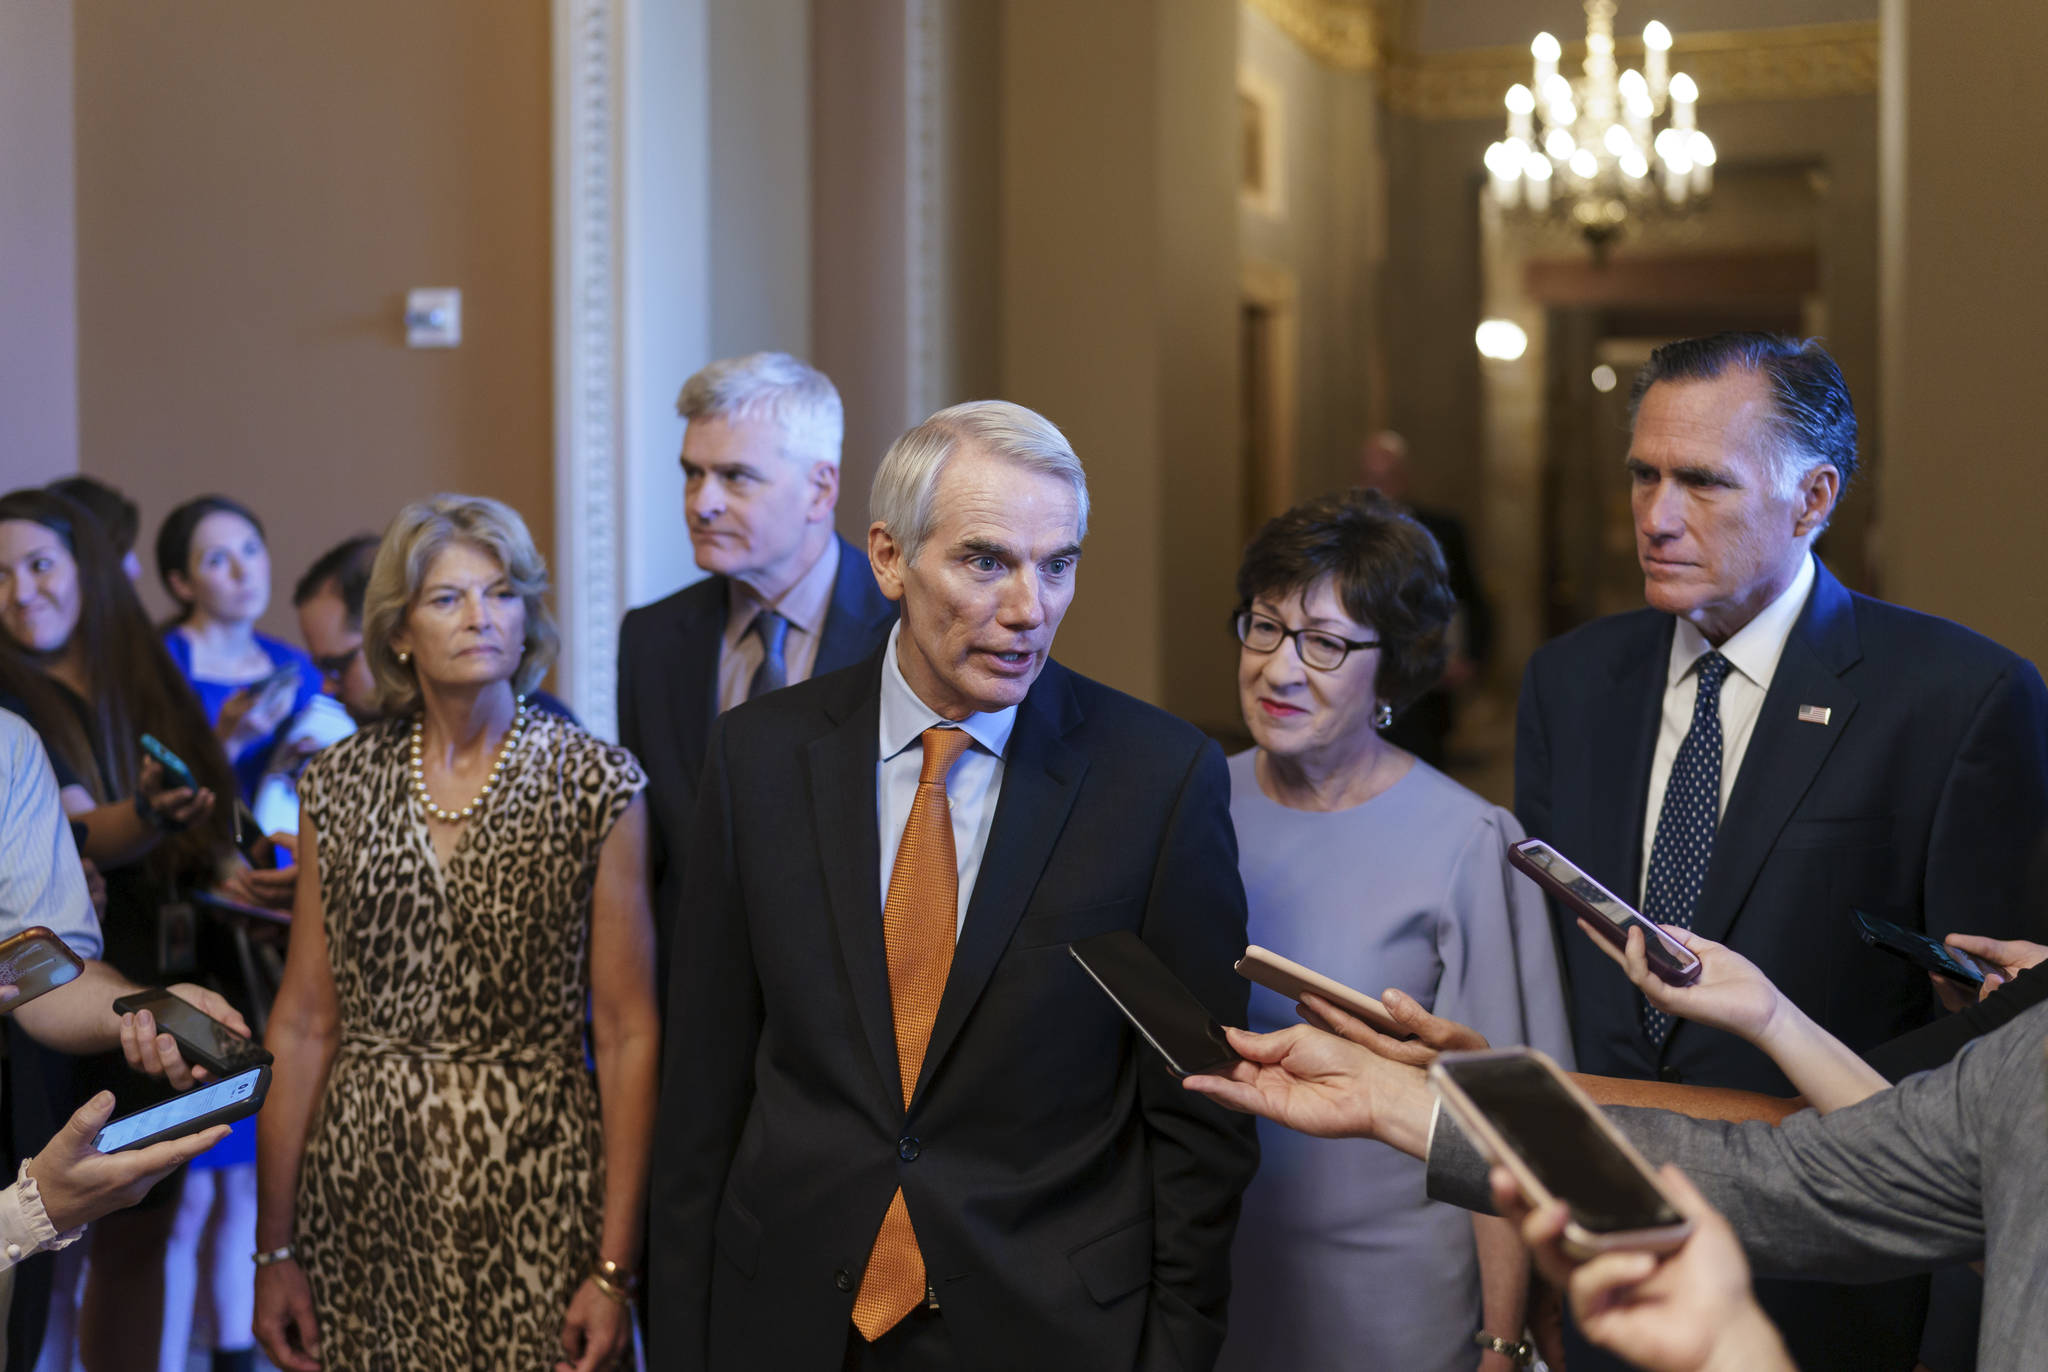 AP Photo/J. Scott Applewhite 
Sen. Rob Portman, R-Ohio, center, joined by, from left, Sen. Lisa Murkowski, R-Alaska, Sen. Bill Cassidy, R-La., Sen. Susan Collins, R-Maine, and Sen. Mitt Romney, R-Utah, announces to reporters that he and the other GOP negotiators have reached agreement on a $1 trillion infrastructure bill with Democrats and are ready to vote to take up the bill, at the Capitol in Washington, Wednesday, July 28, 2021.